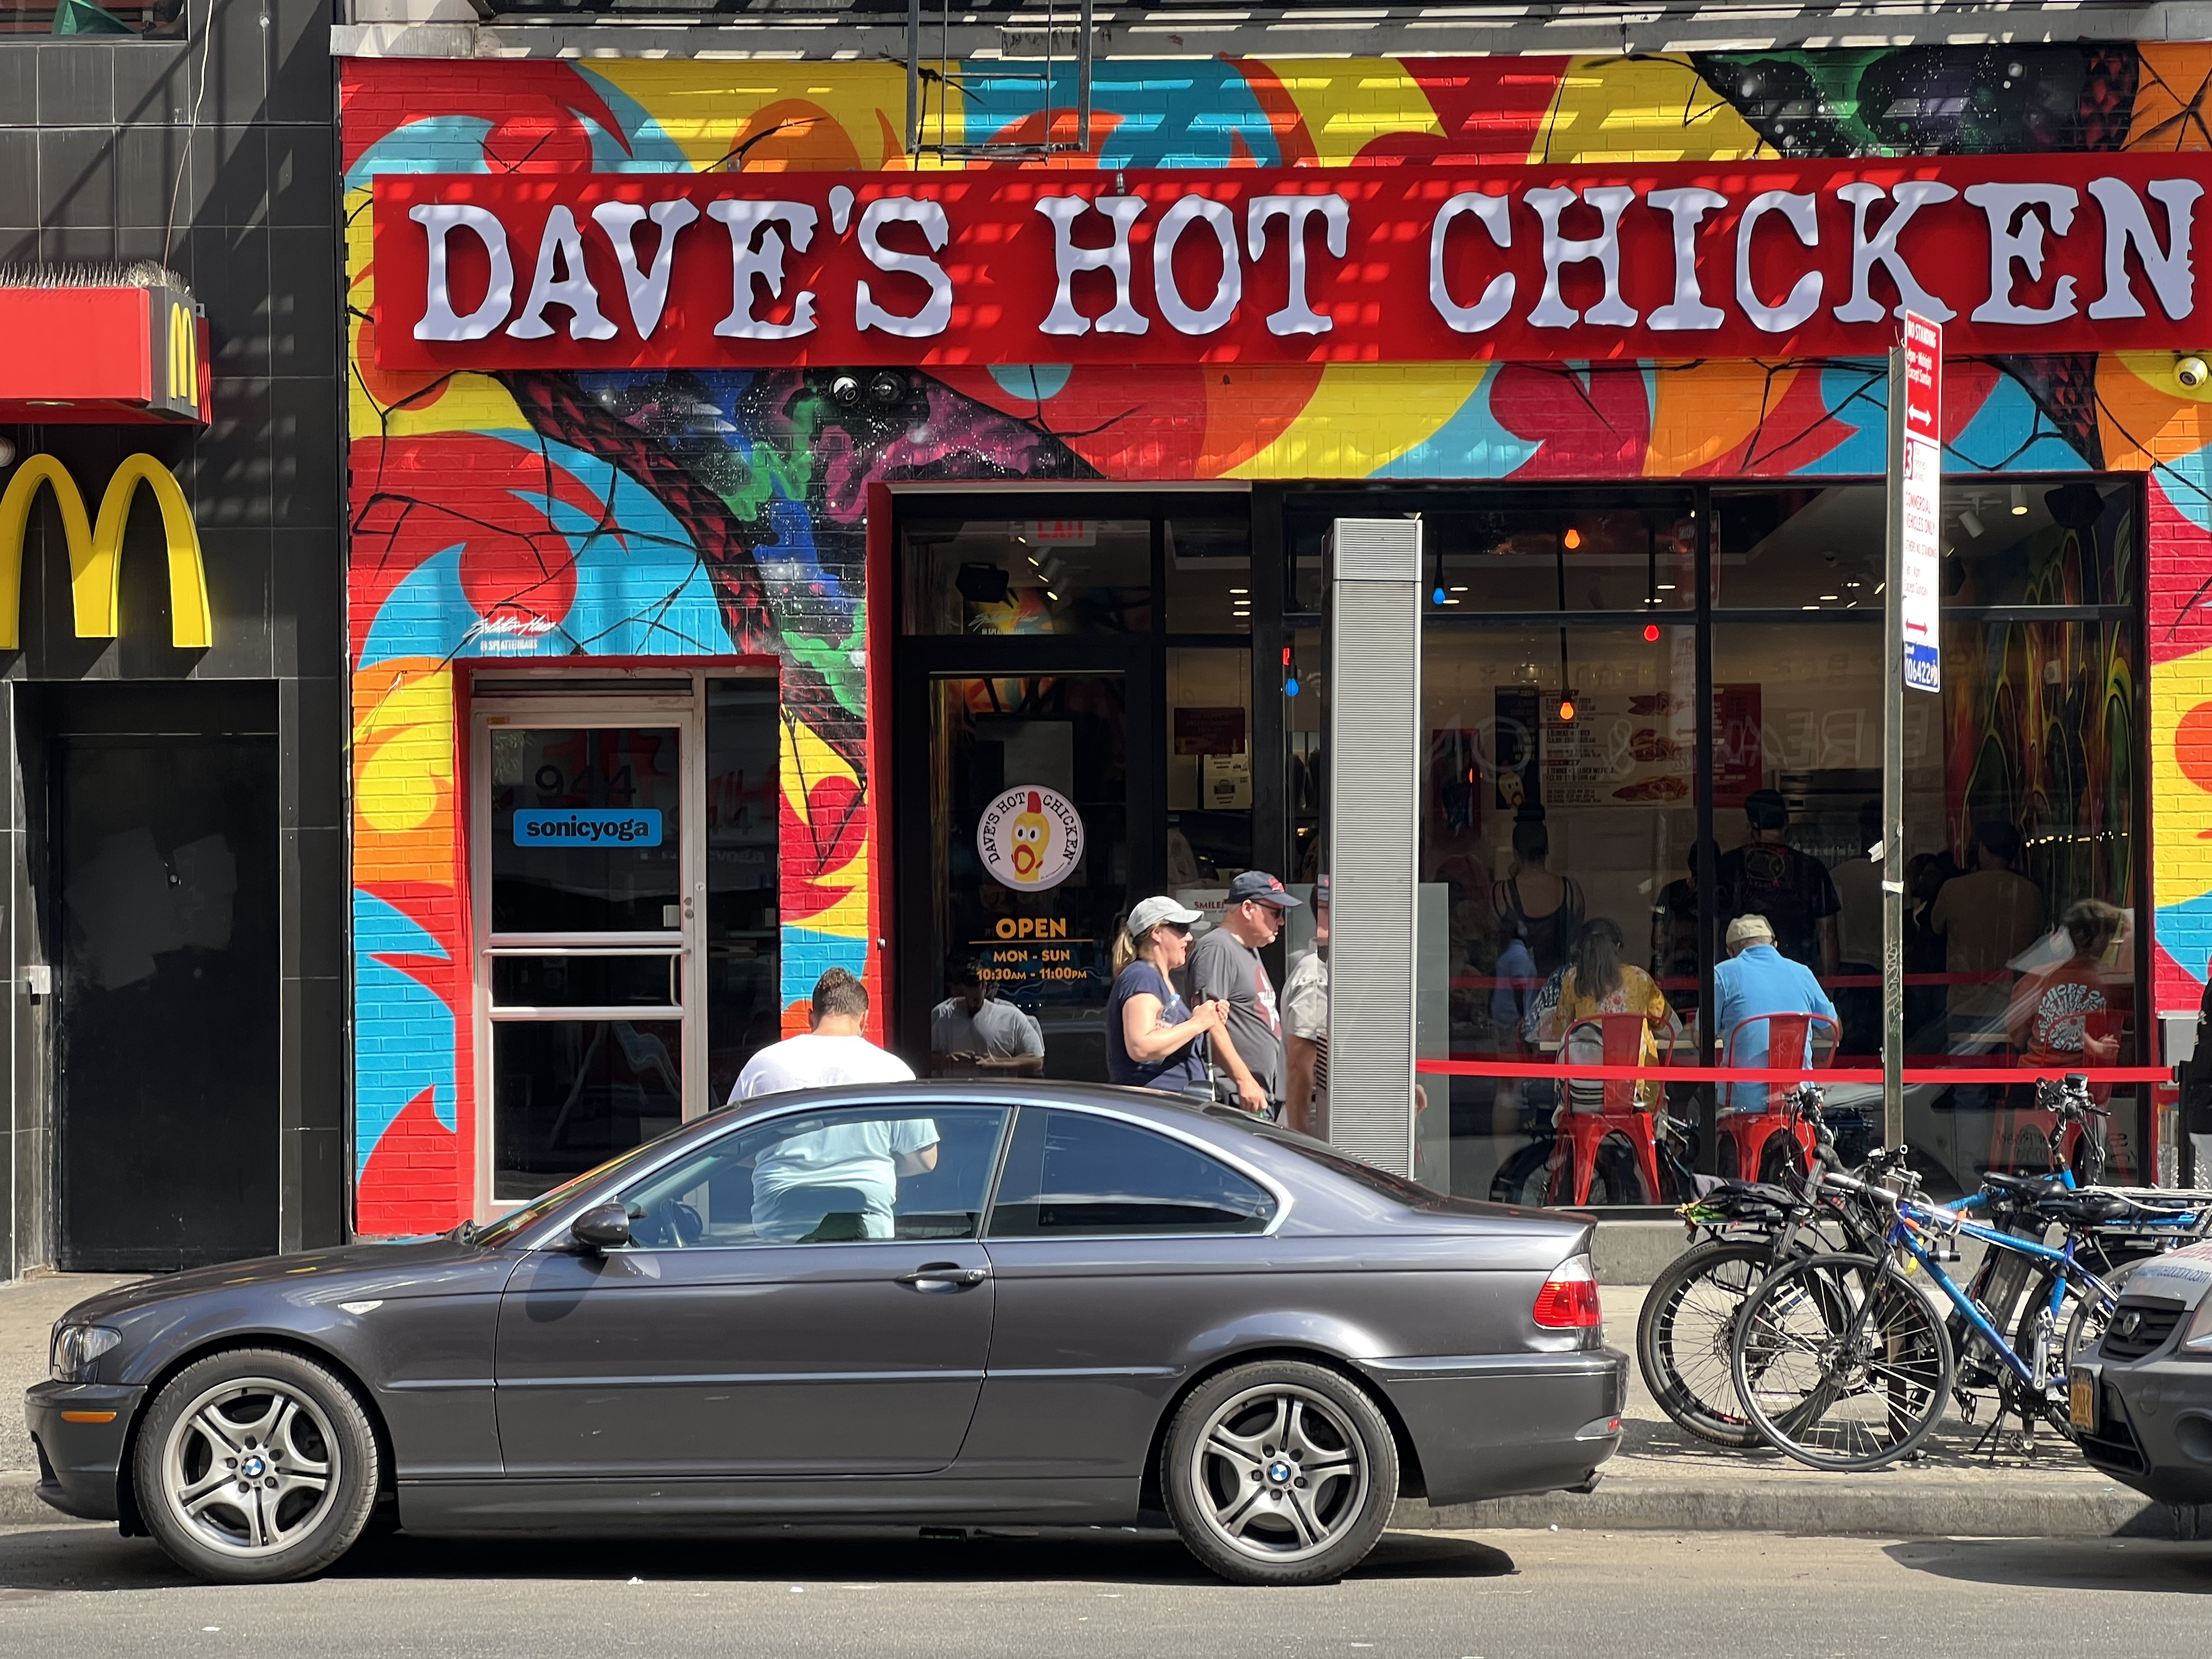 The multi-colored exterior facade of Dave’s Hot chicken is shown with pedestrians walking by